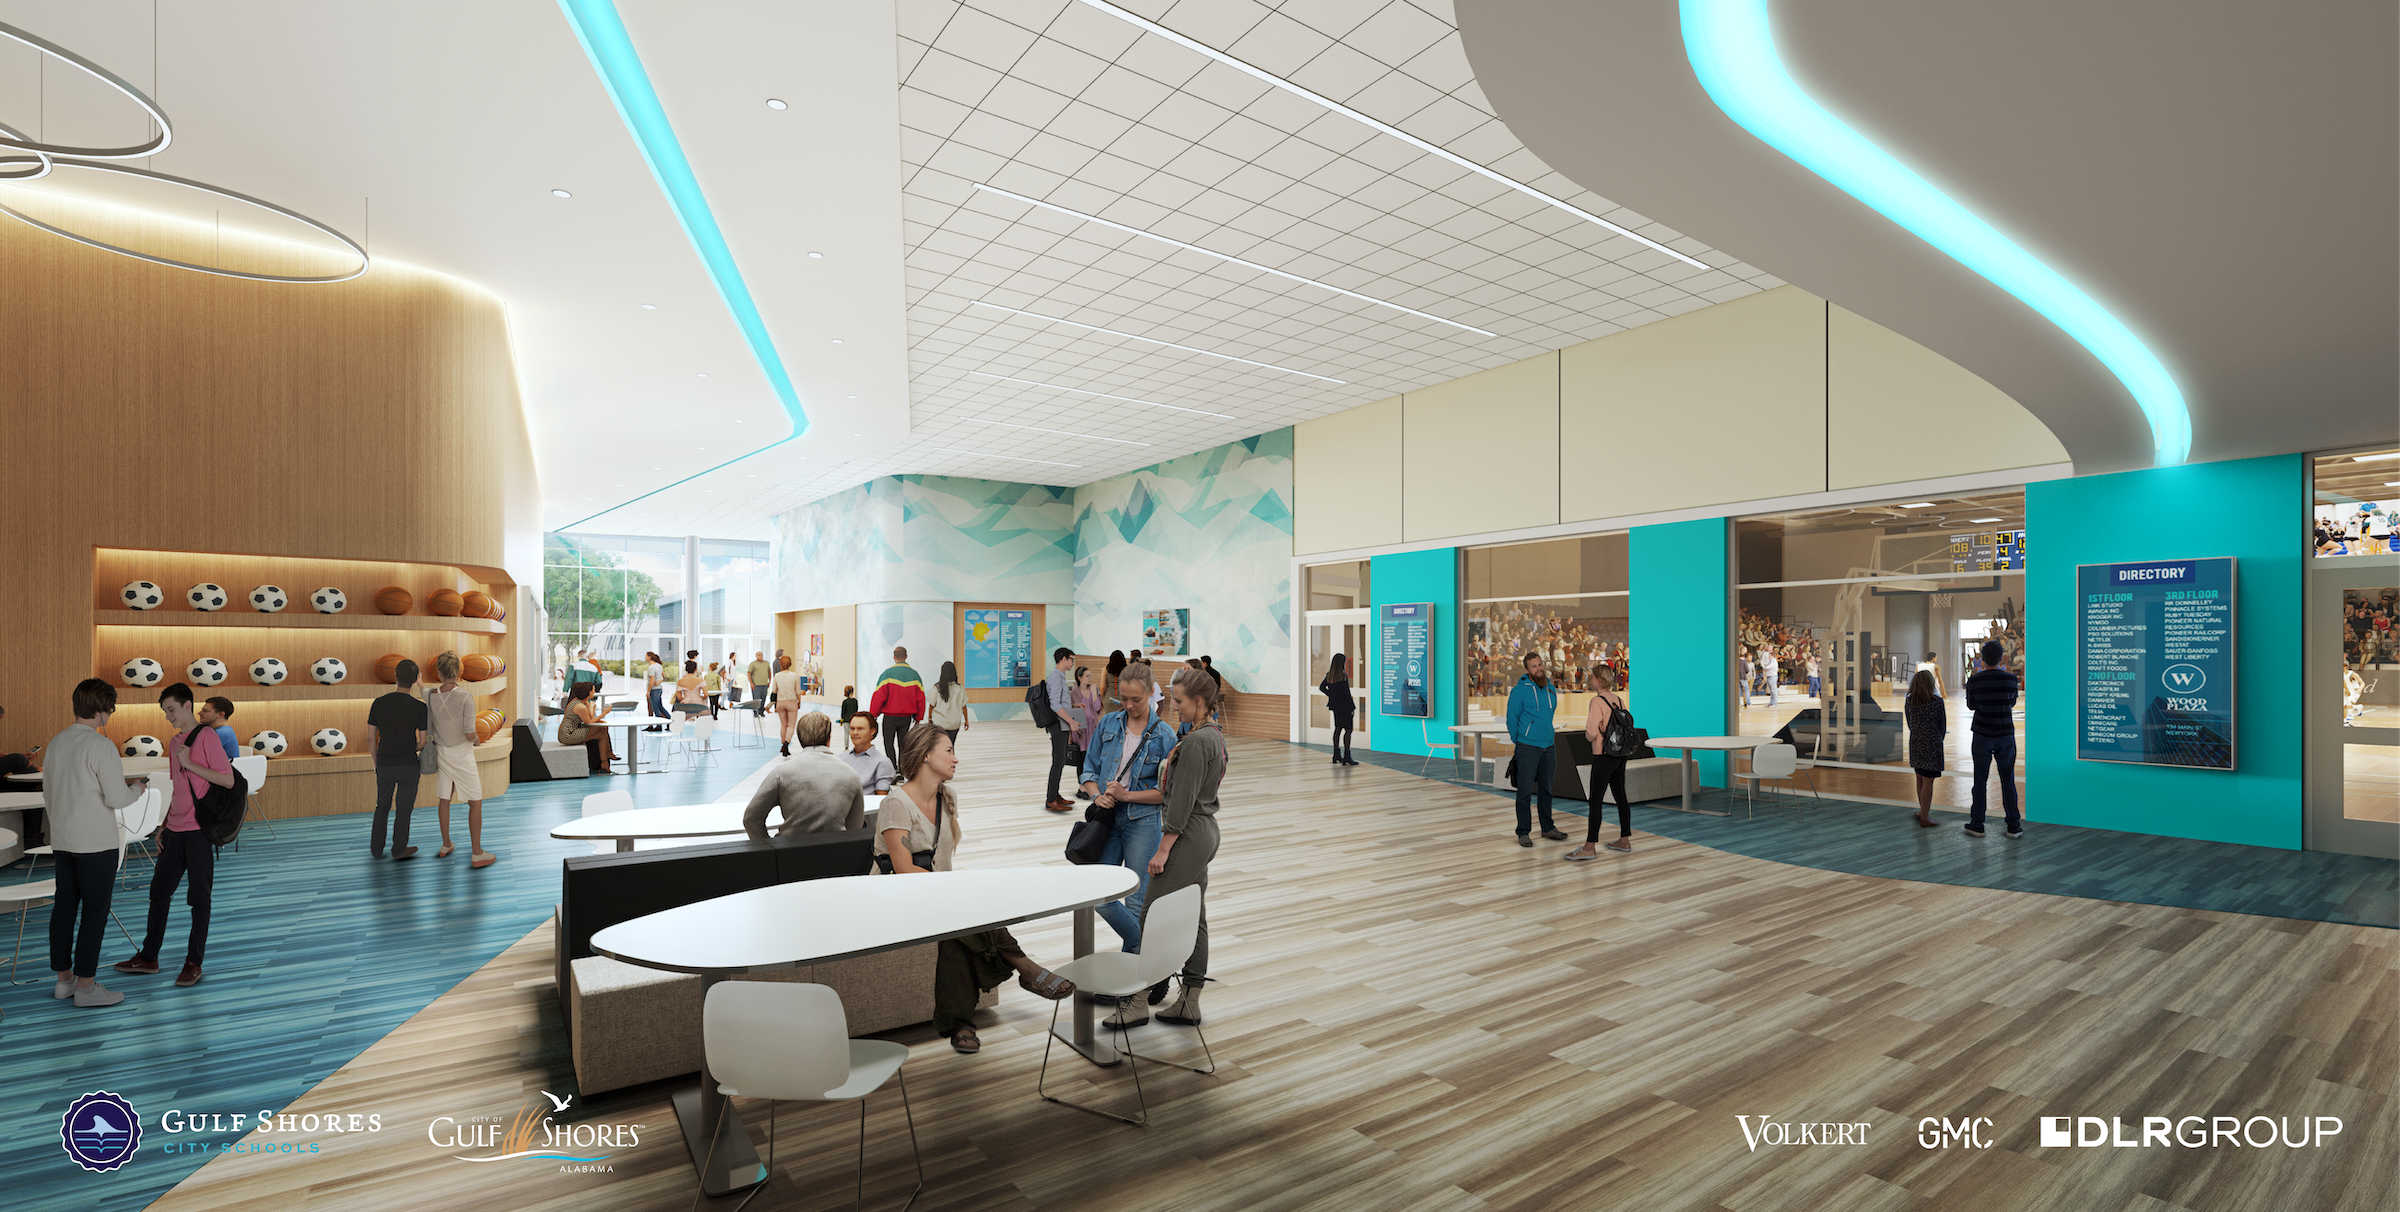 Designed by DLR Group and Goodwyn Mills Cawood, the 287,000-sf Gulf Shores High School will offer cutting-edge facilities and hands-on learning opportunities.